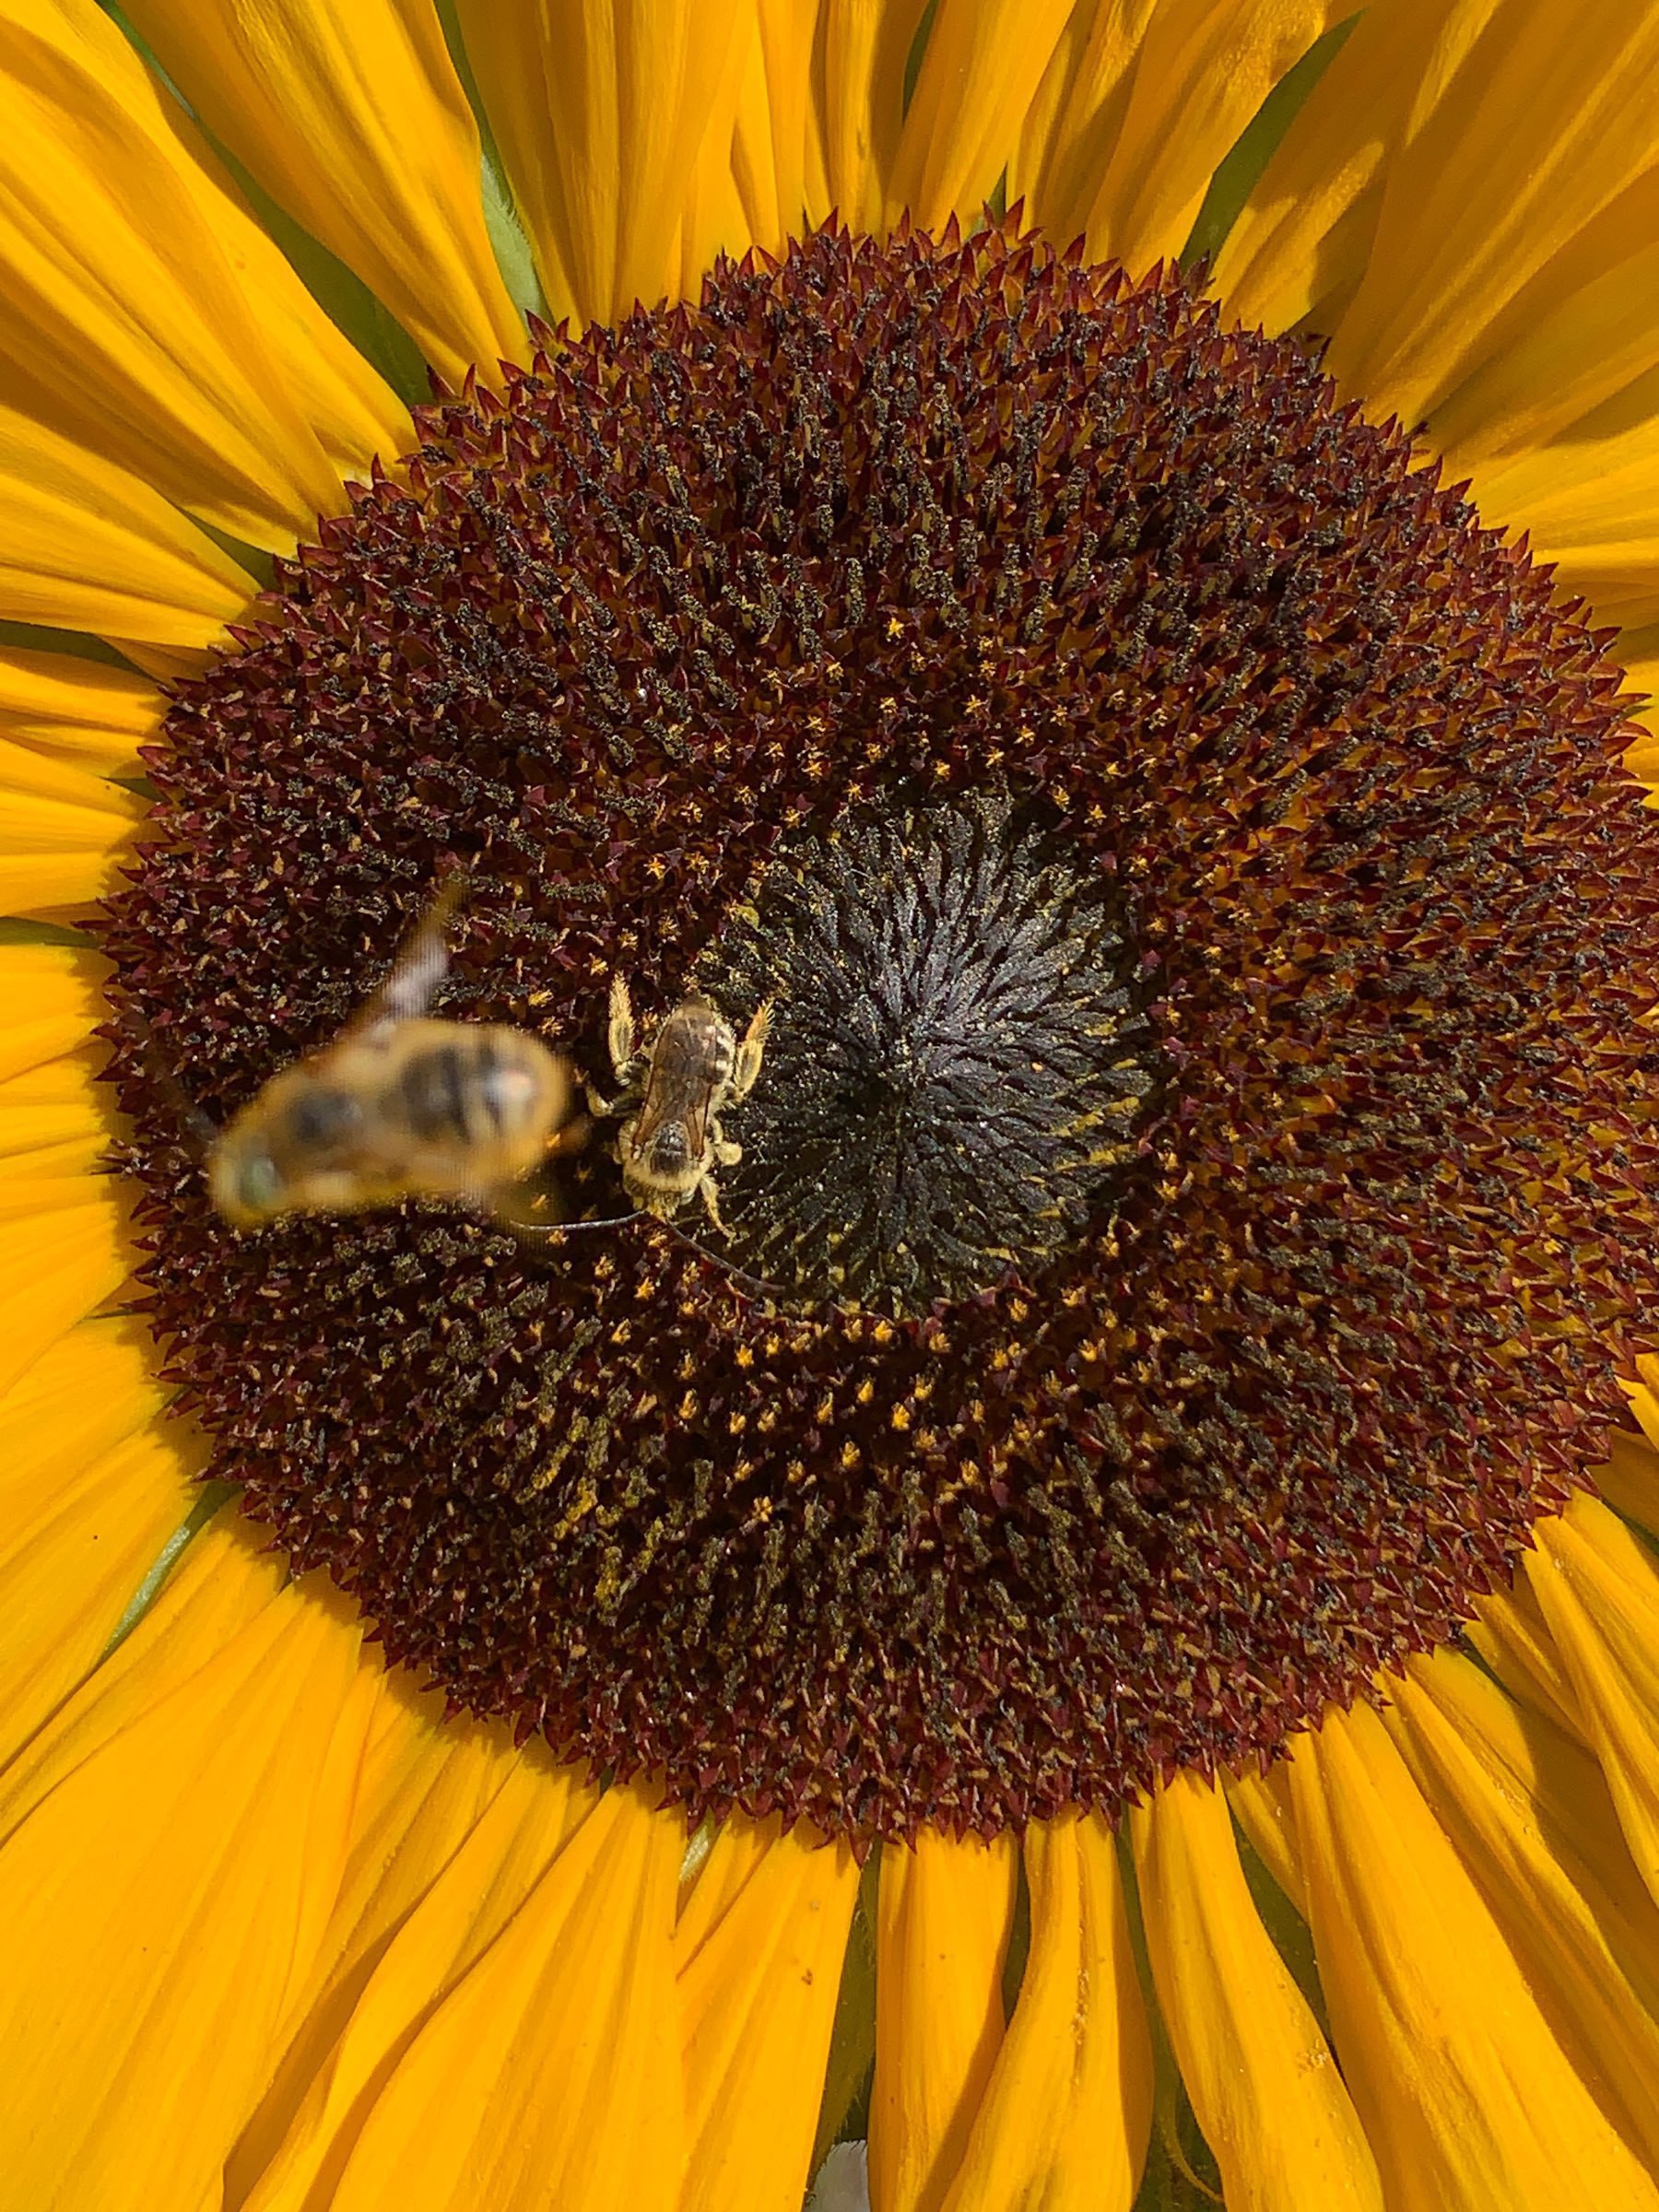 bee photobombing another bee in a sunflower center